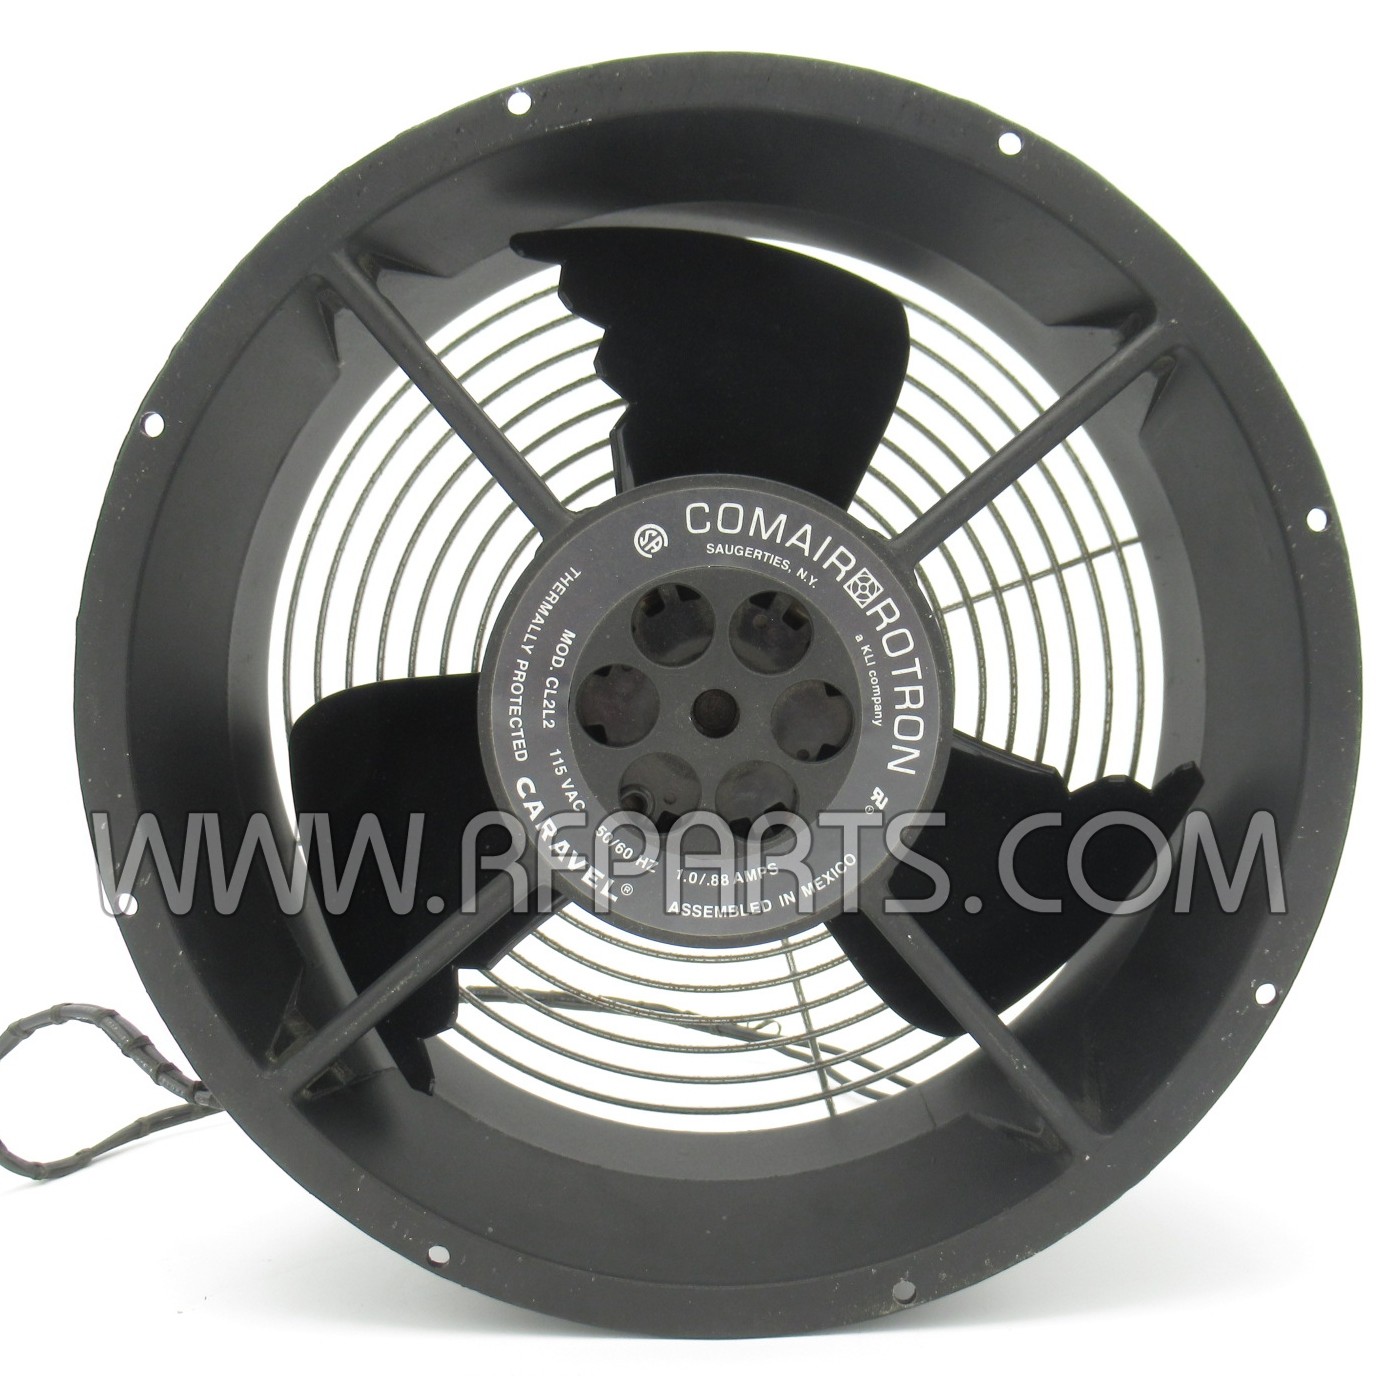 COMAIR ROTRON CARAVEL CL2T2 115VAC 50/60Hz 1.0/.88Amps Thermally Protected Fan 